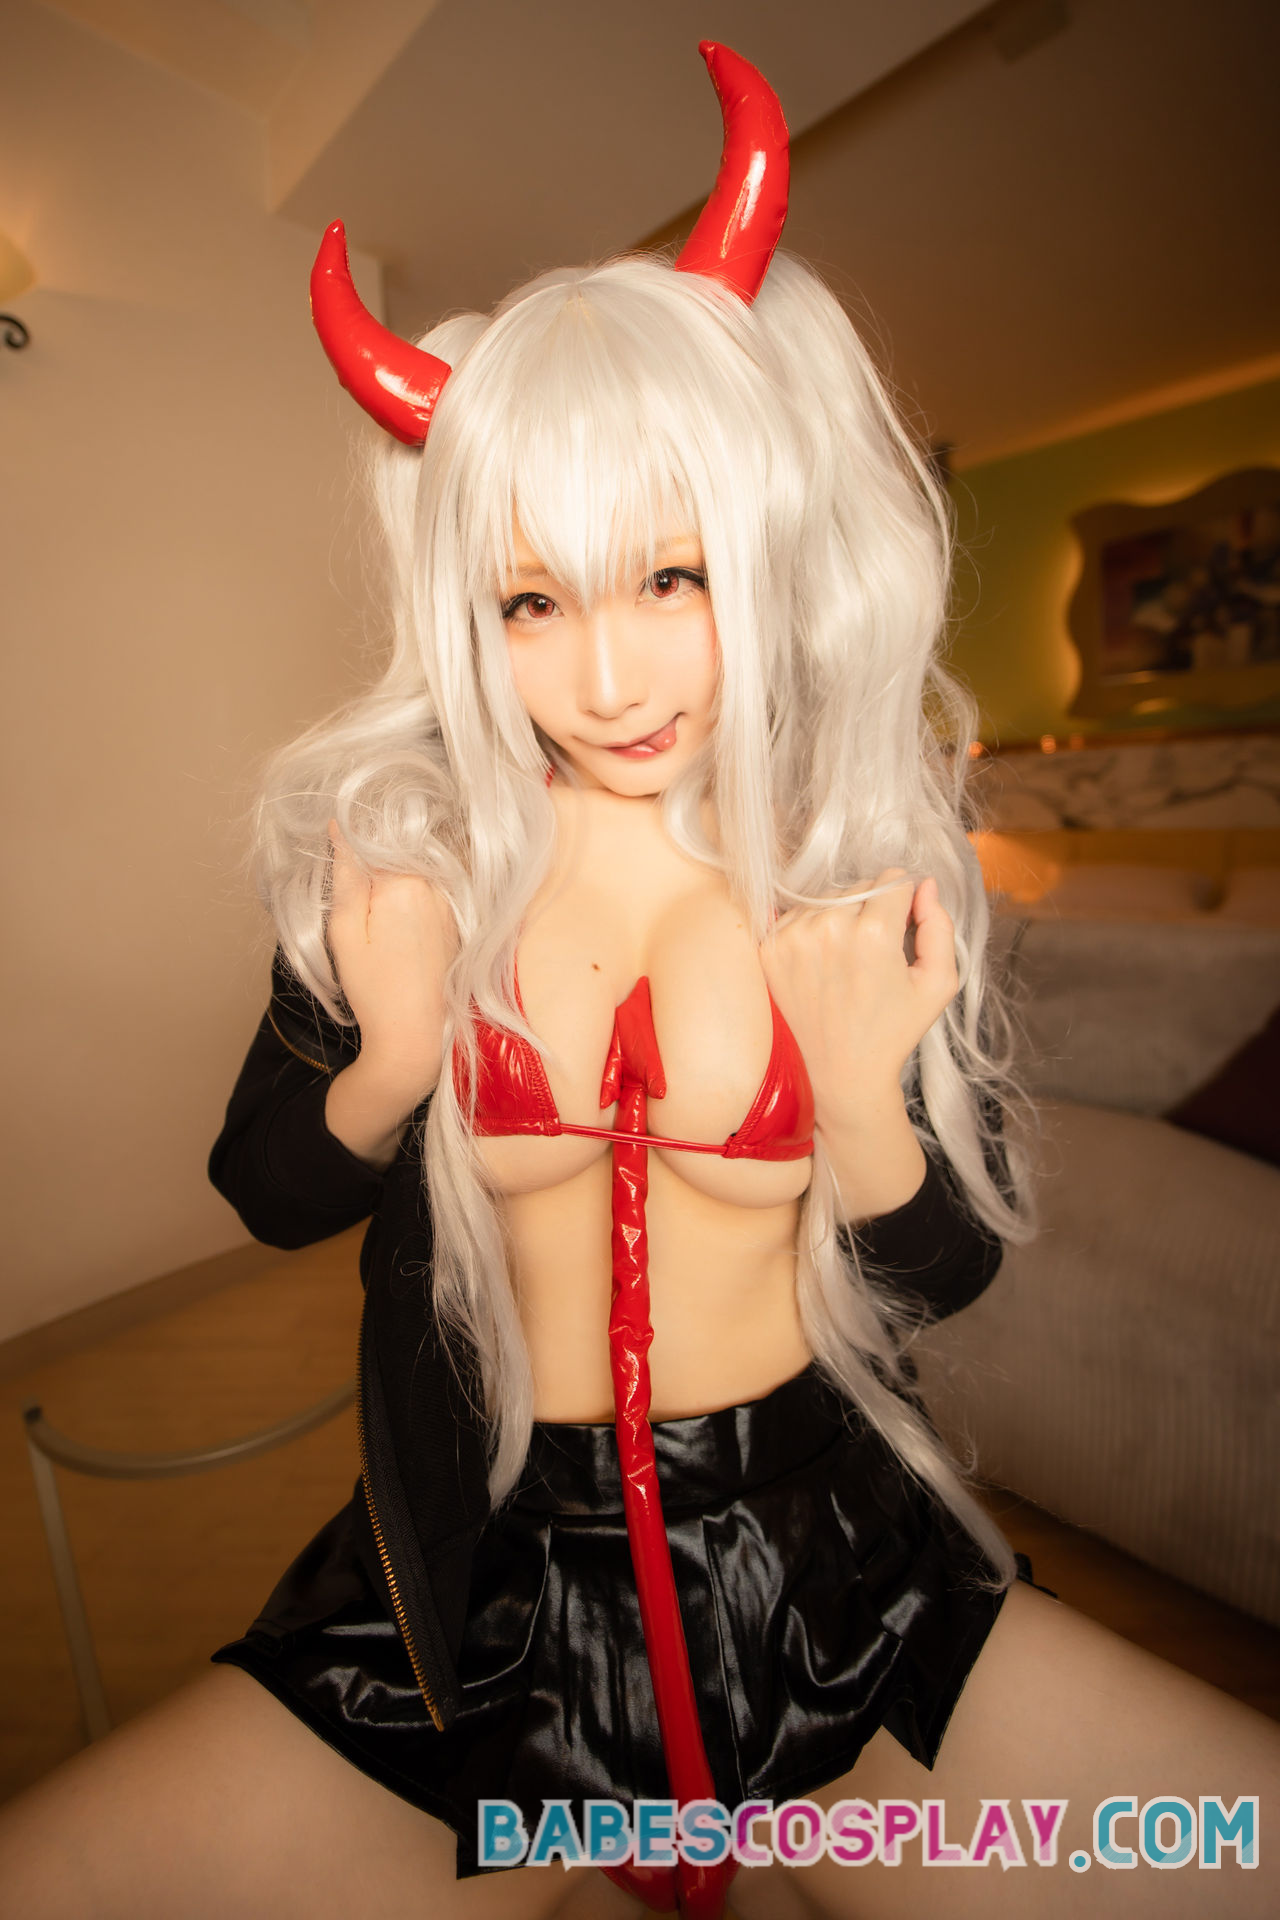 Watch the Photo by Babes Cosplay with the username @babescosplay, posted on December 7, 2020. The post is about the topic Sexy Succubus. and the text says 'Give Me Something Else To Squeeze With My Tits~'